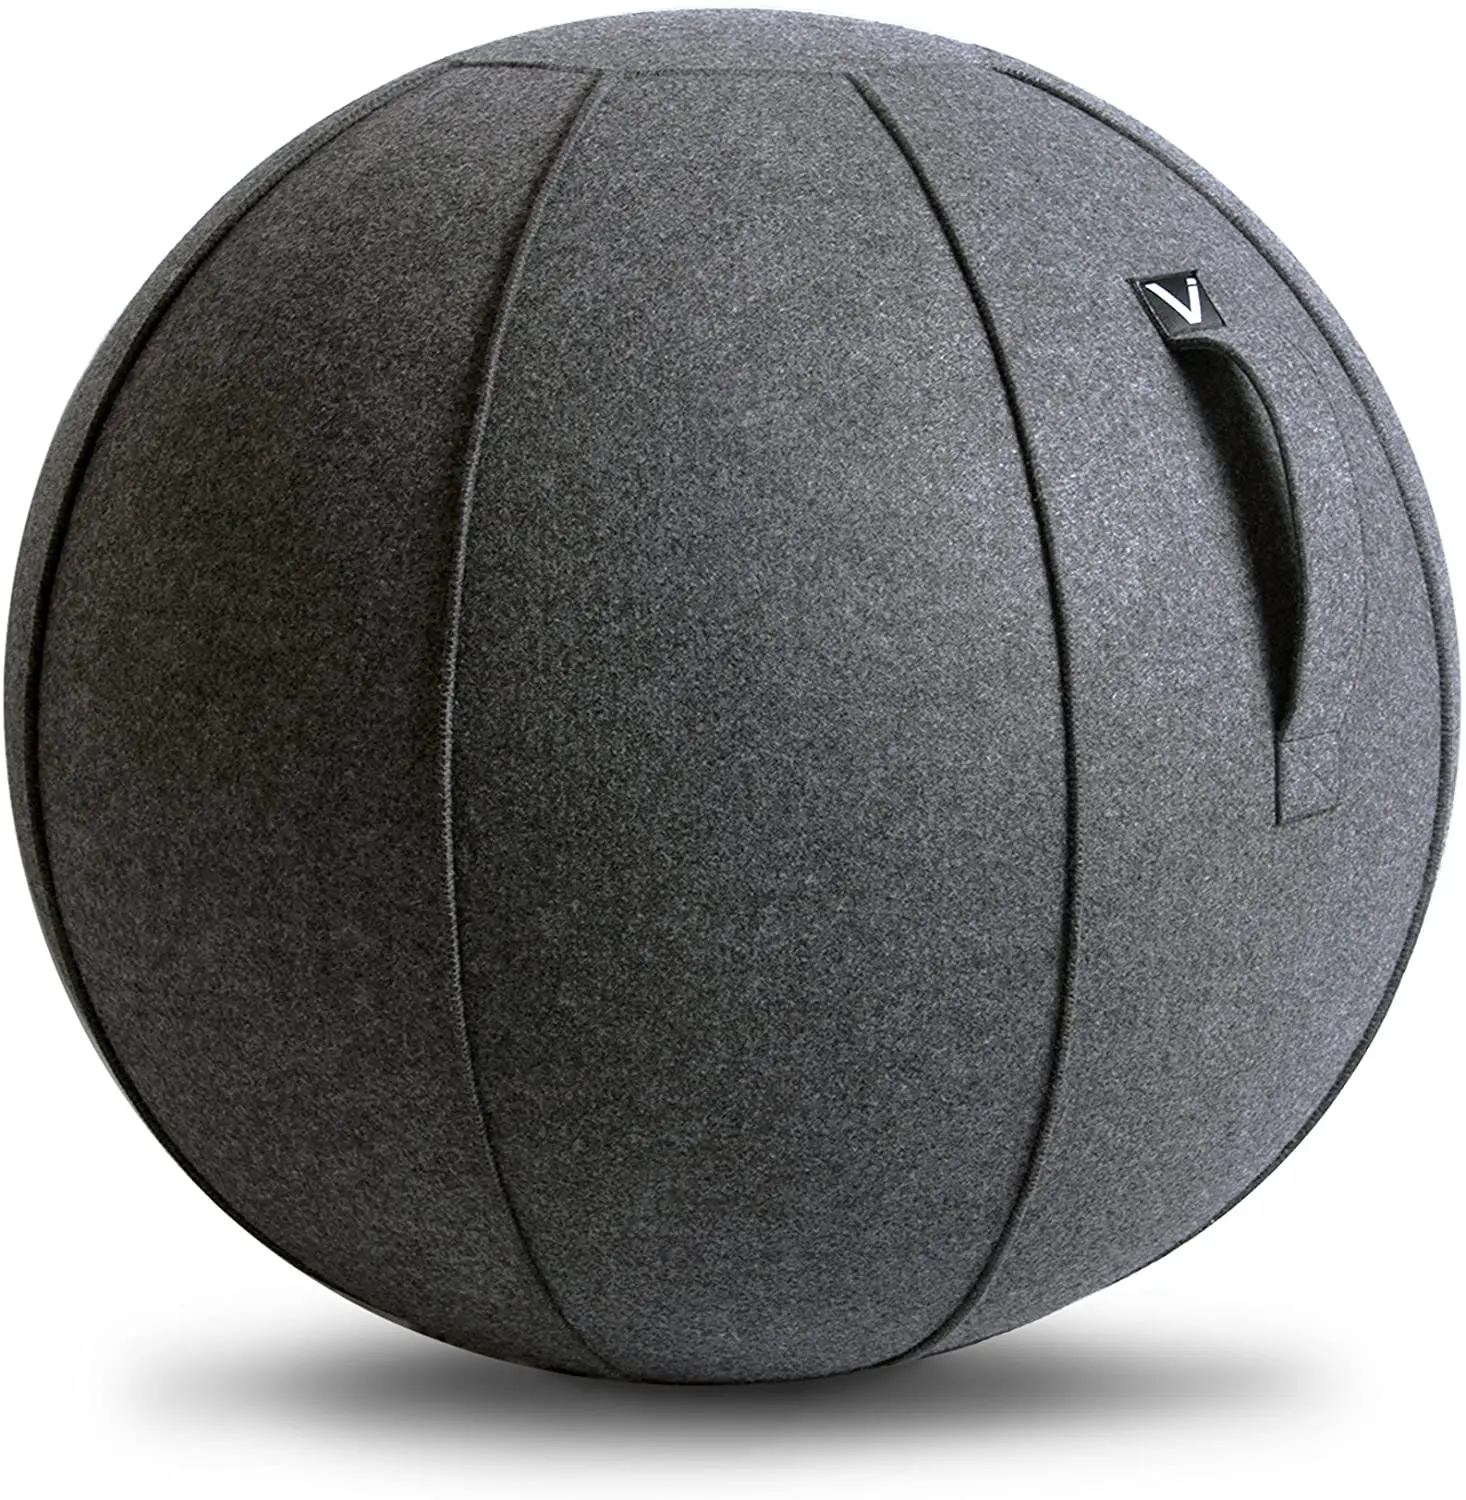 

Sitting Ball Chair for Office, Dorm, and Home, Lightweight Self-Standing Ergonomic Posture Exercise Ball with Fabric Cover